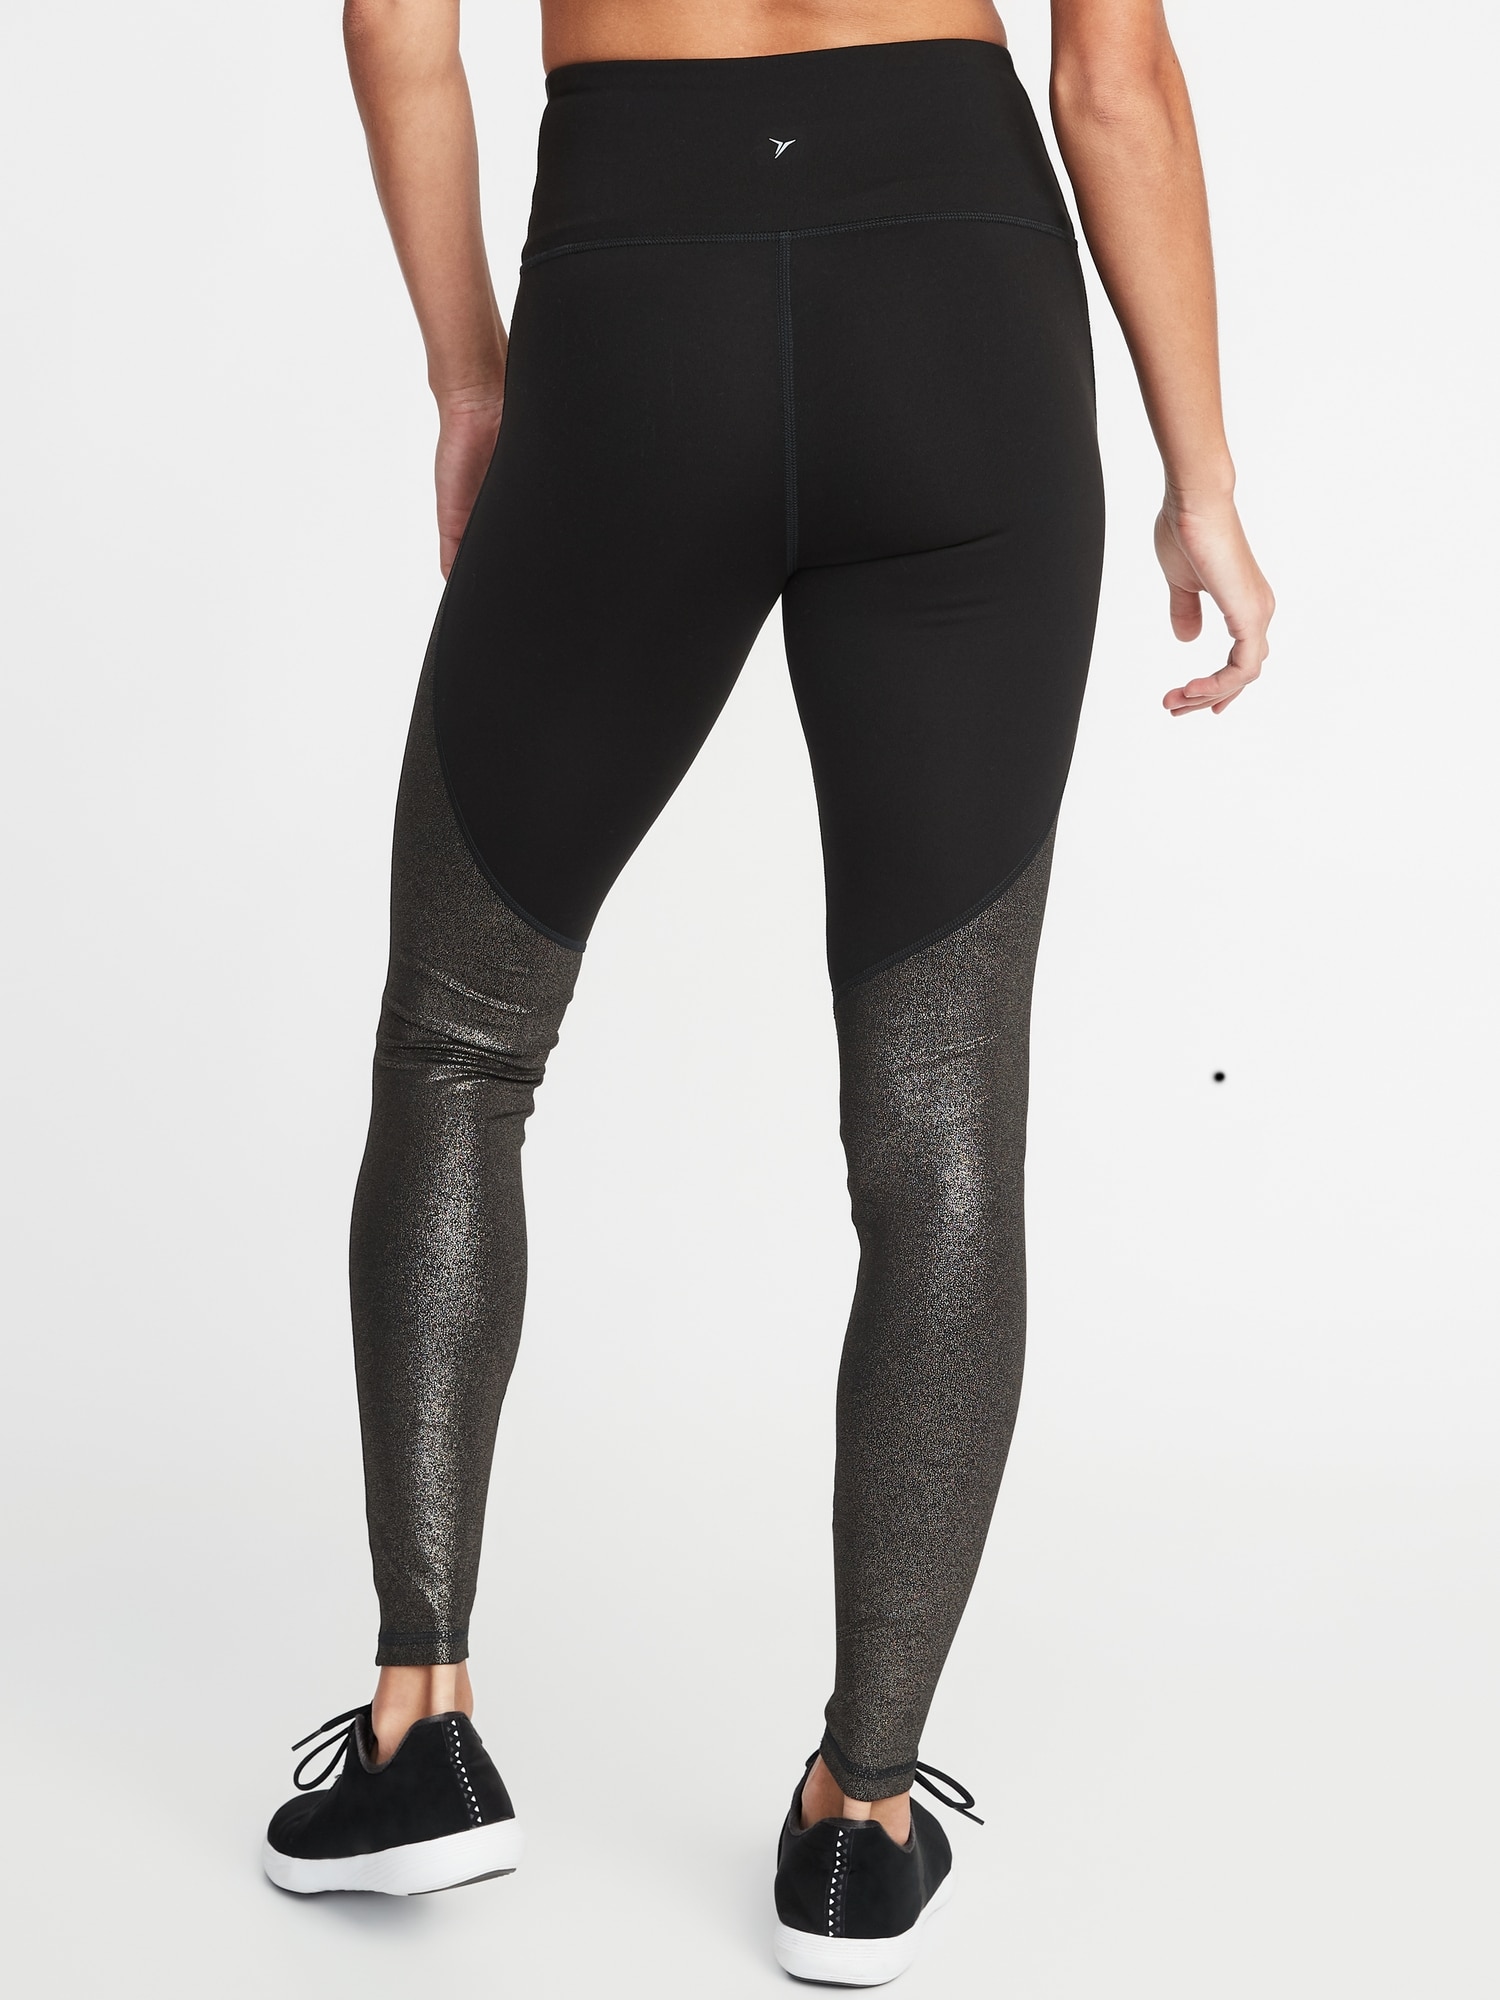 Prisma Shimmer Leggings in Frenchwine for a Chic Look